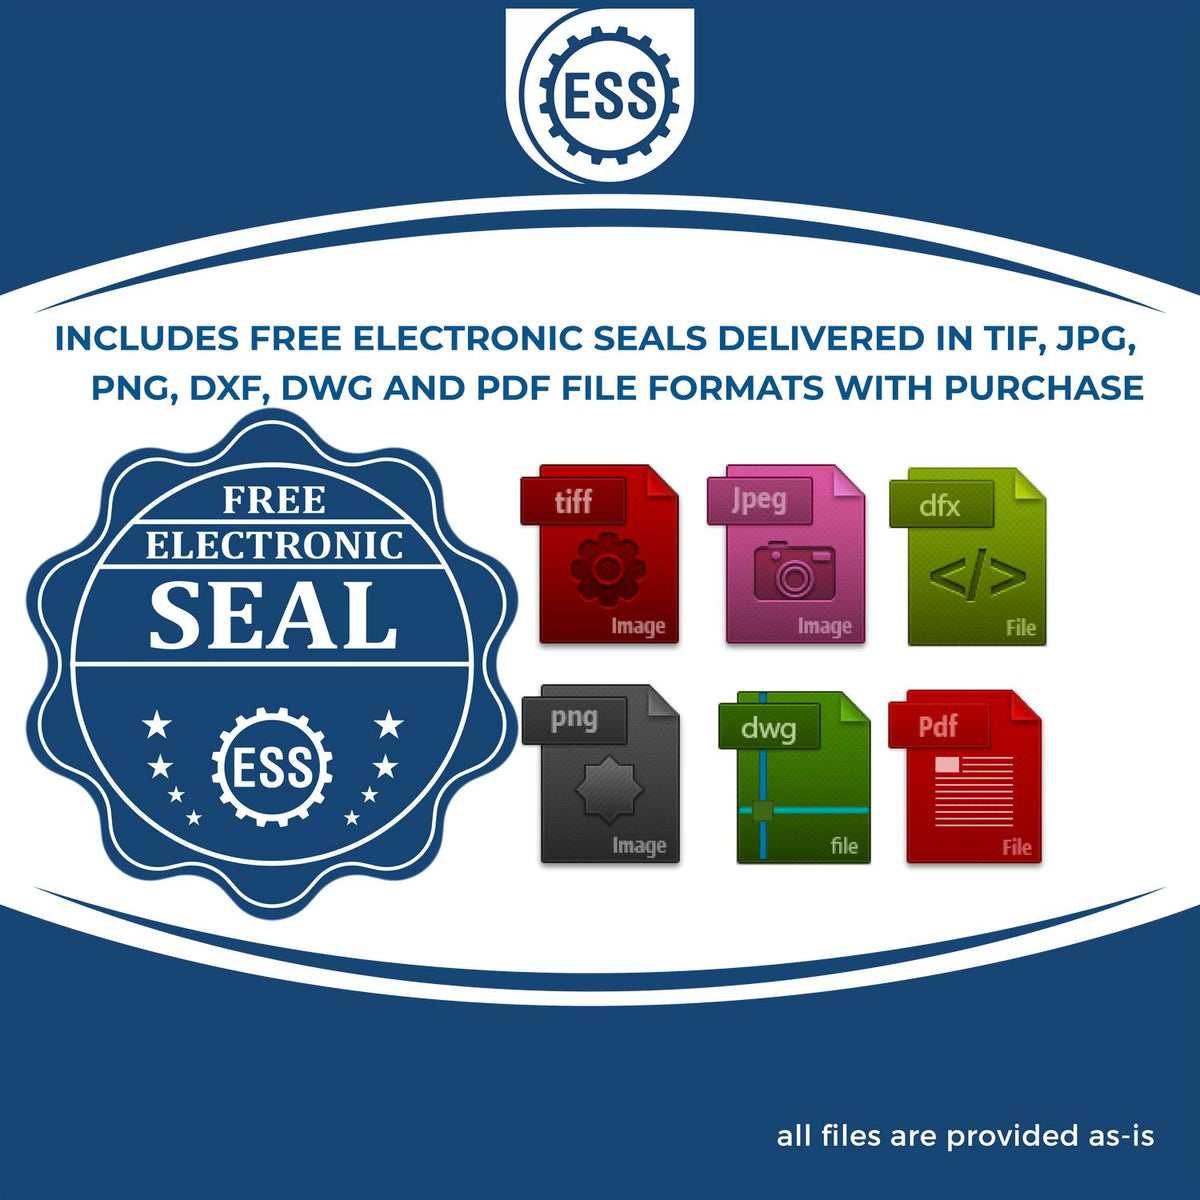 An infographic for the free electronic seal for the MaxLight Premium Pre-Inked Kentucky State Seal Notarial Stamp illustrating the different file type icons such as DXF, DWG, TIF, JPG and PNG.